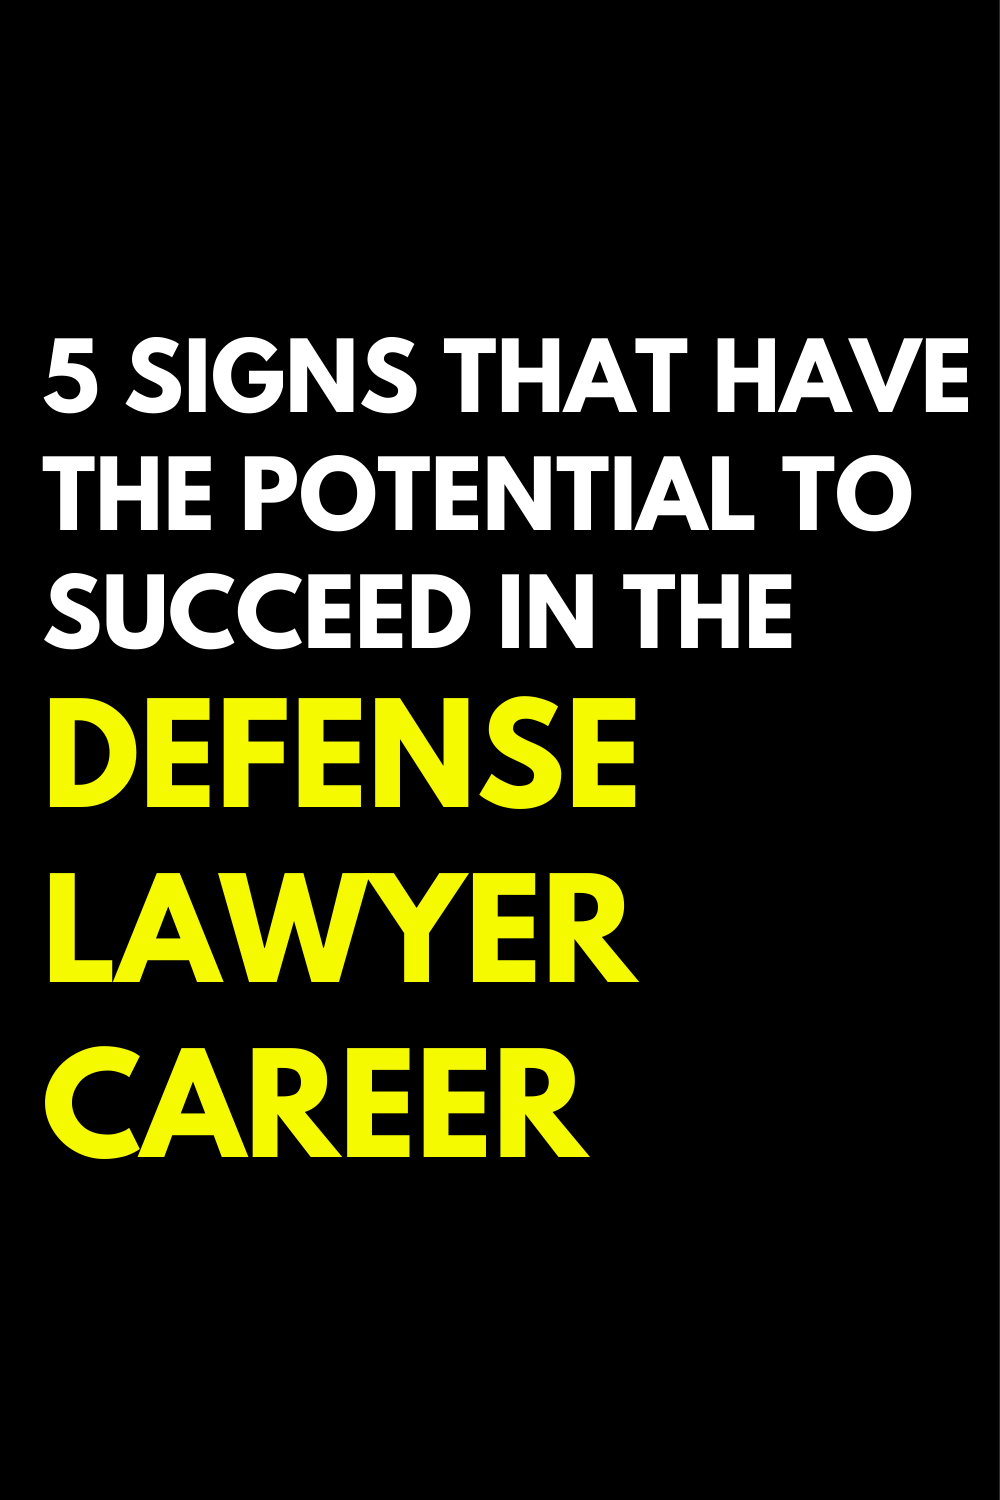 5 signs that have the potential to succeed in the defense lawyer career